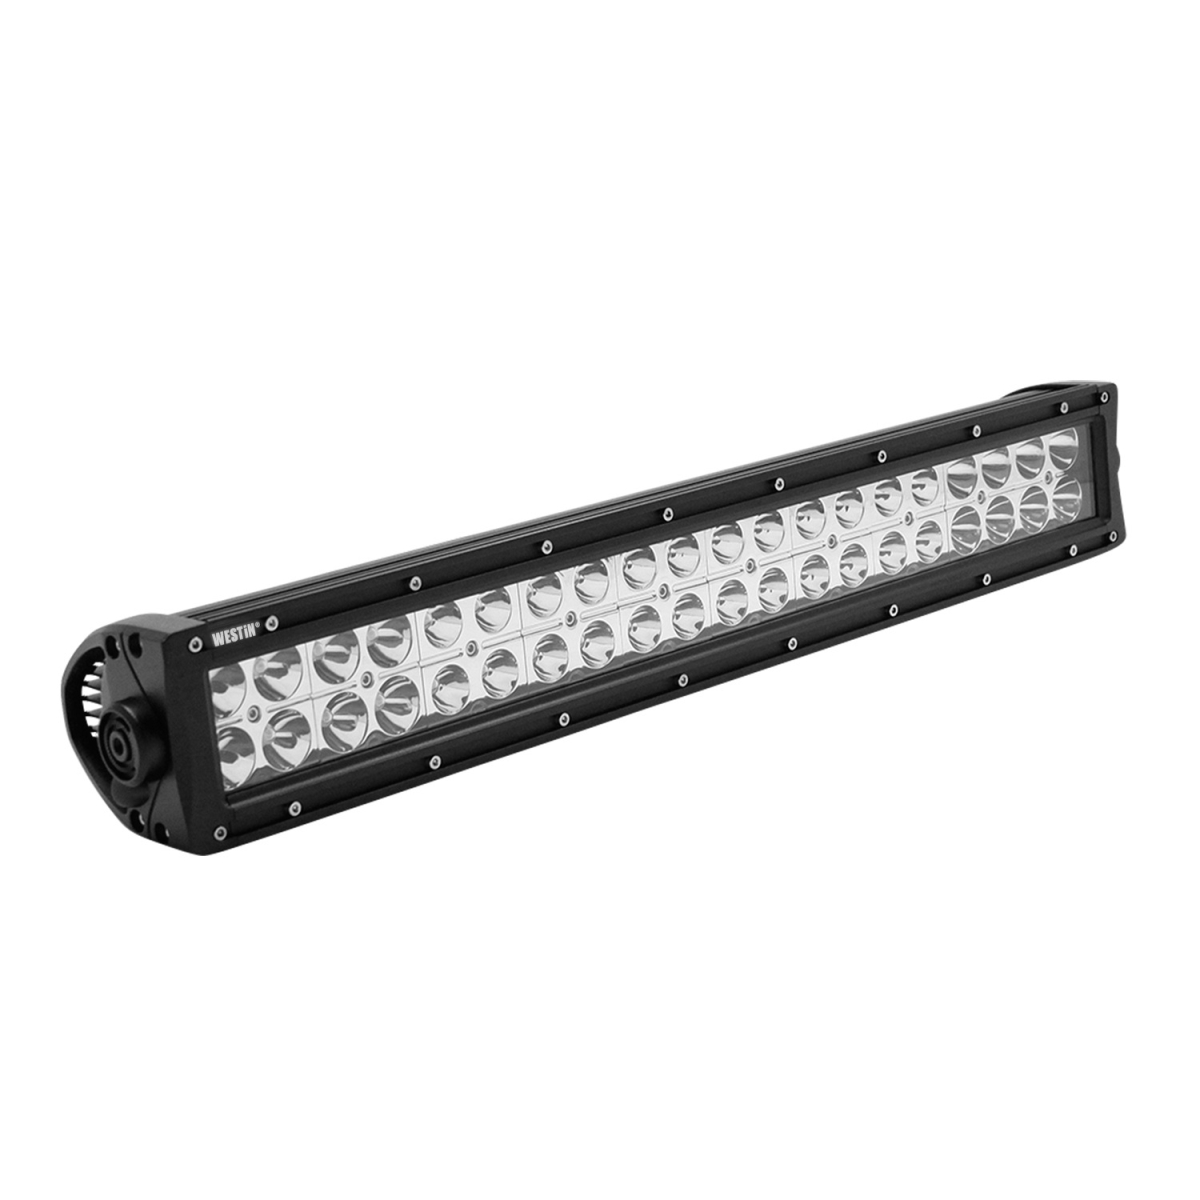 Wes09-13220c Ef2 Led Light Bar For Double Row 20 In. Combo With 3w Epistar